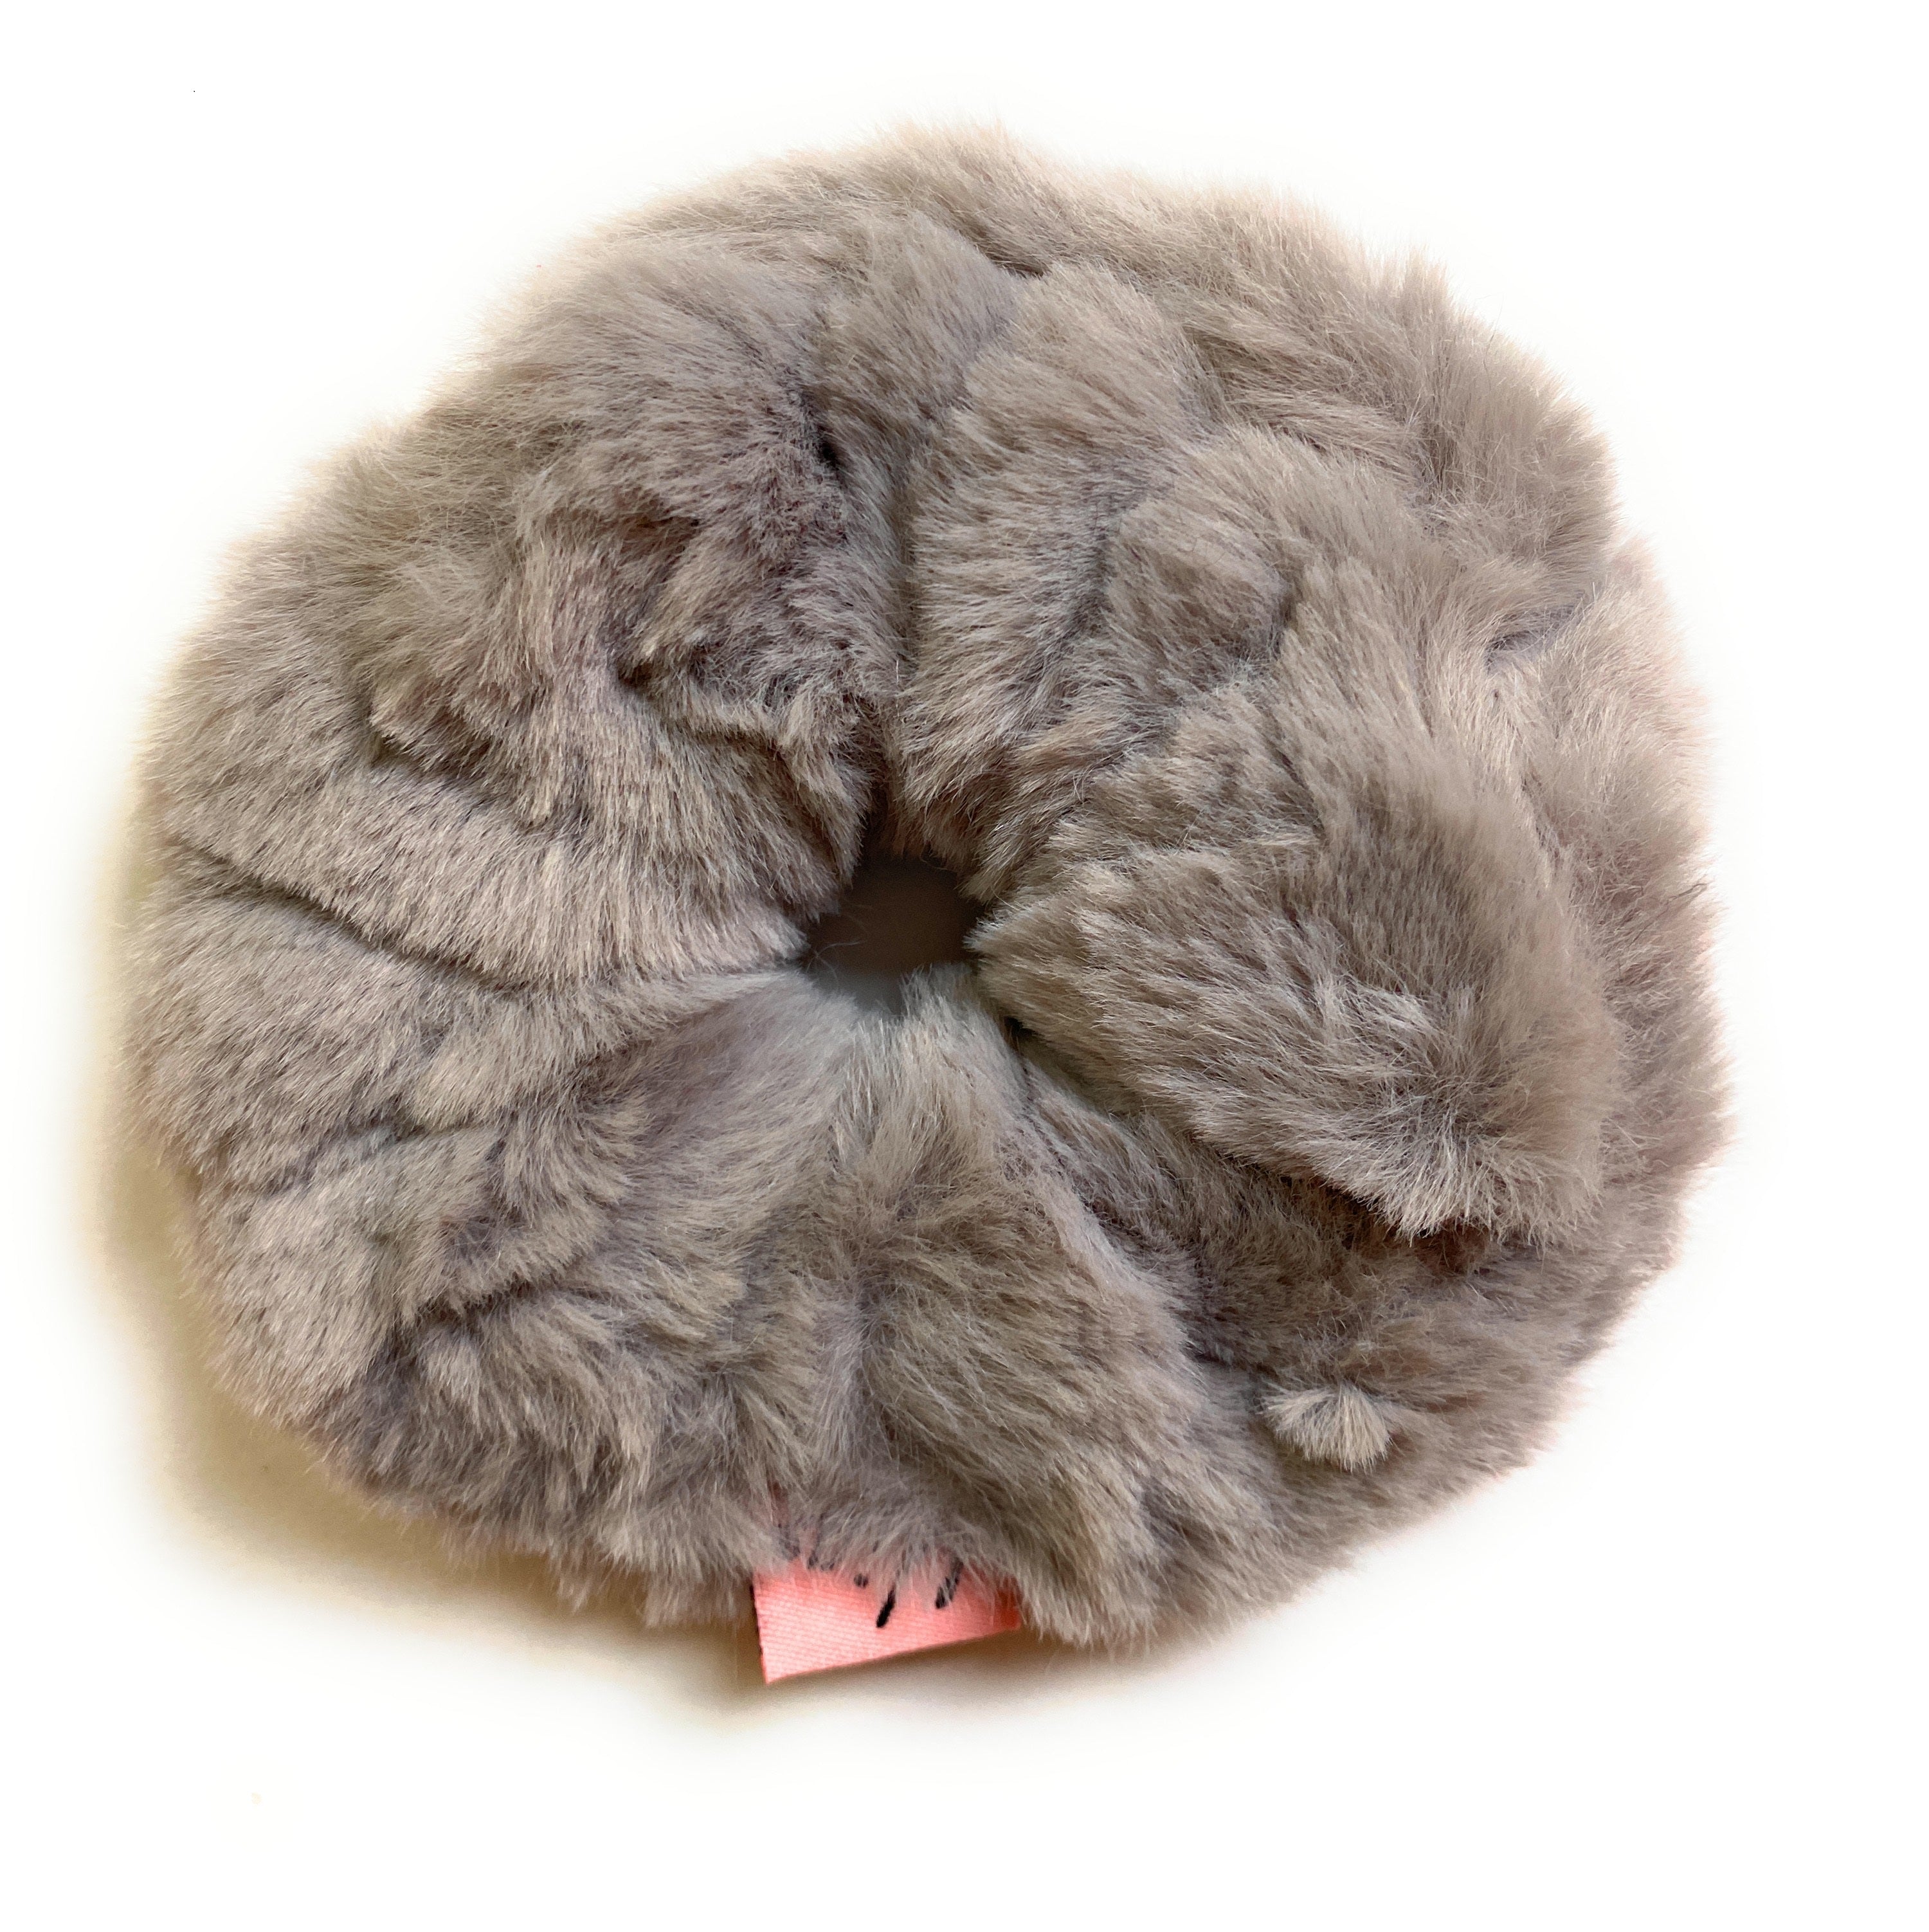 Mia Beauty Furry Scrunchie Ponytail holder hair accessory gray color